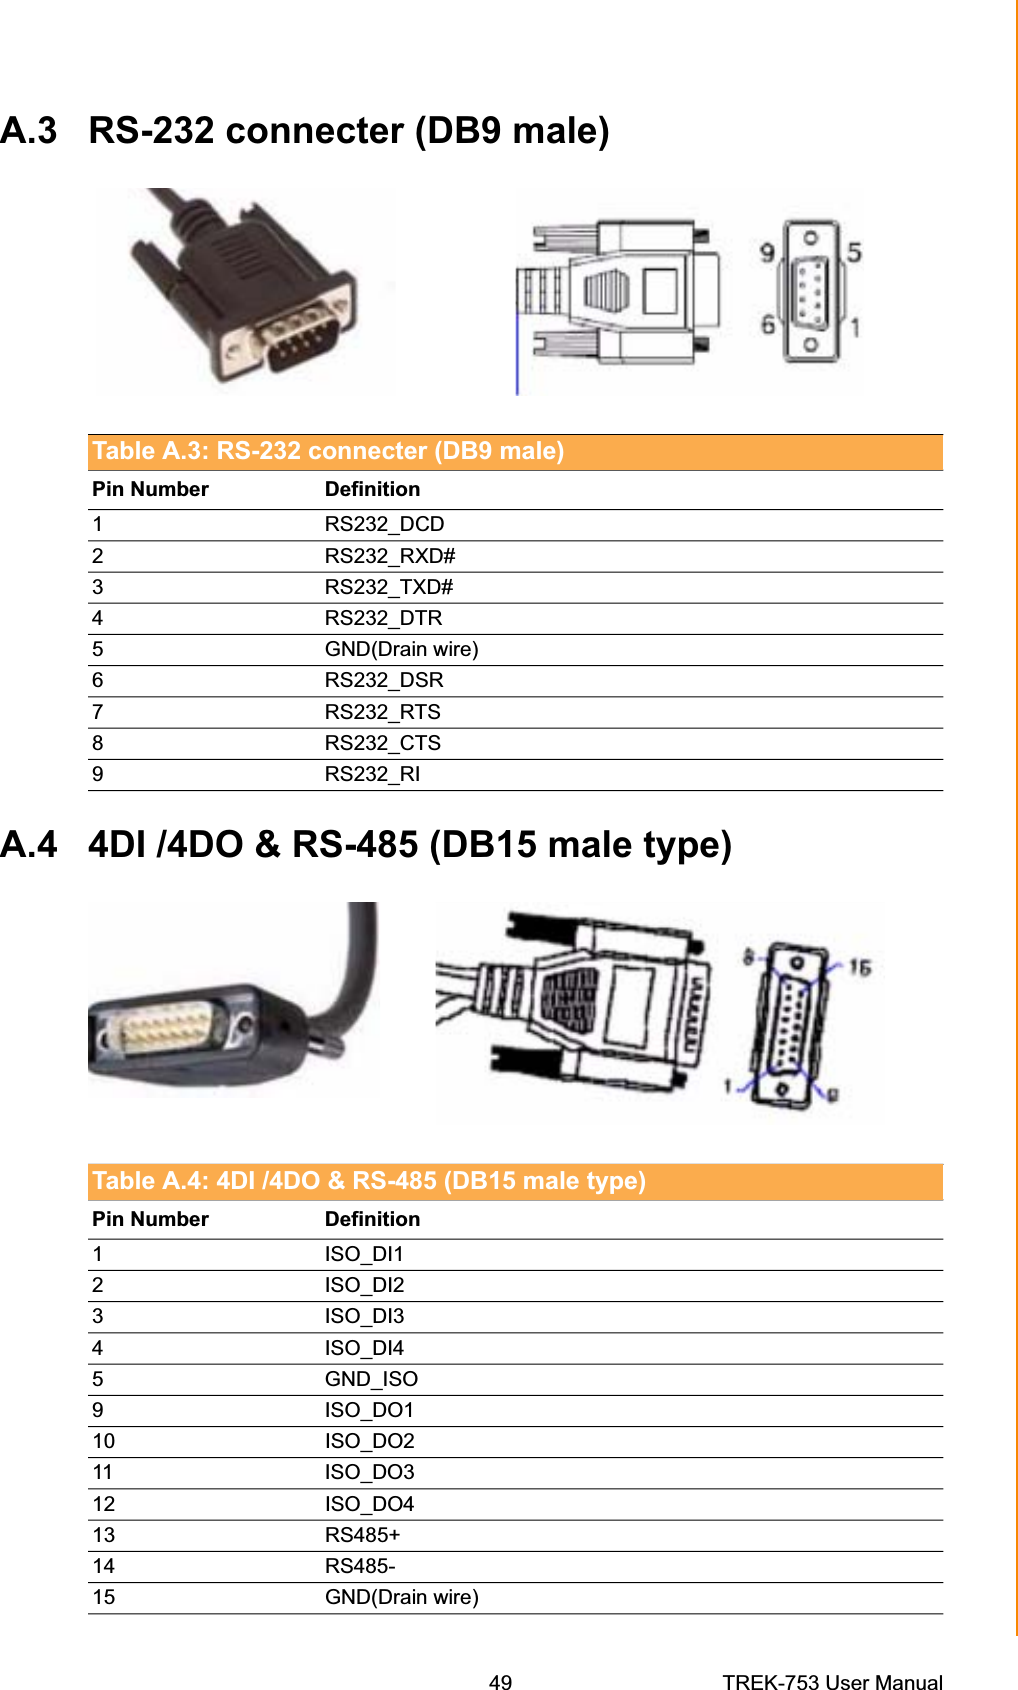 A.3 RS-232 connecter (DB9 male)Table A.3: RS-232 connecter (DB9 male) Pin Number  Definition 1 RS232_DCD 2 RS232_RXD# 3 RS232_TXD# 4 RS232_DTR 5 GND(Drain wire) 6 RS232_DSR 7 RS232_RTS 8 RS232_CTS 9 RS232_RI A.4 4DI /4DO &amp; RS-485 (DB15 male type)Table A.4: 4DI /4DO &amp; RS-485 (DB15 male type) Pin Number  Definition 1ISO_DI12ISO_DI23ISO_DI34ISO_DI45GND_ISO9ISO_DO110 ISO_DO2 11 ISO_DO3 12 ISO_DO4 13 RS485+ 14 RS485-15 GND(Drain wire) 49 TREK-753 User Manual Appendix A  High Density Cable Pin Assignment